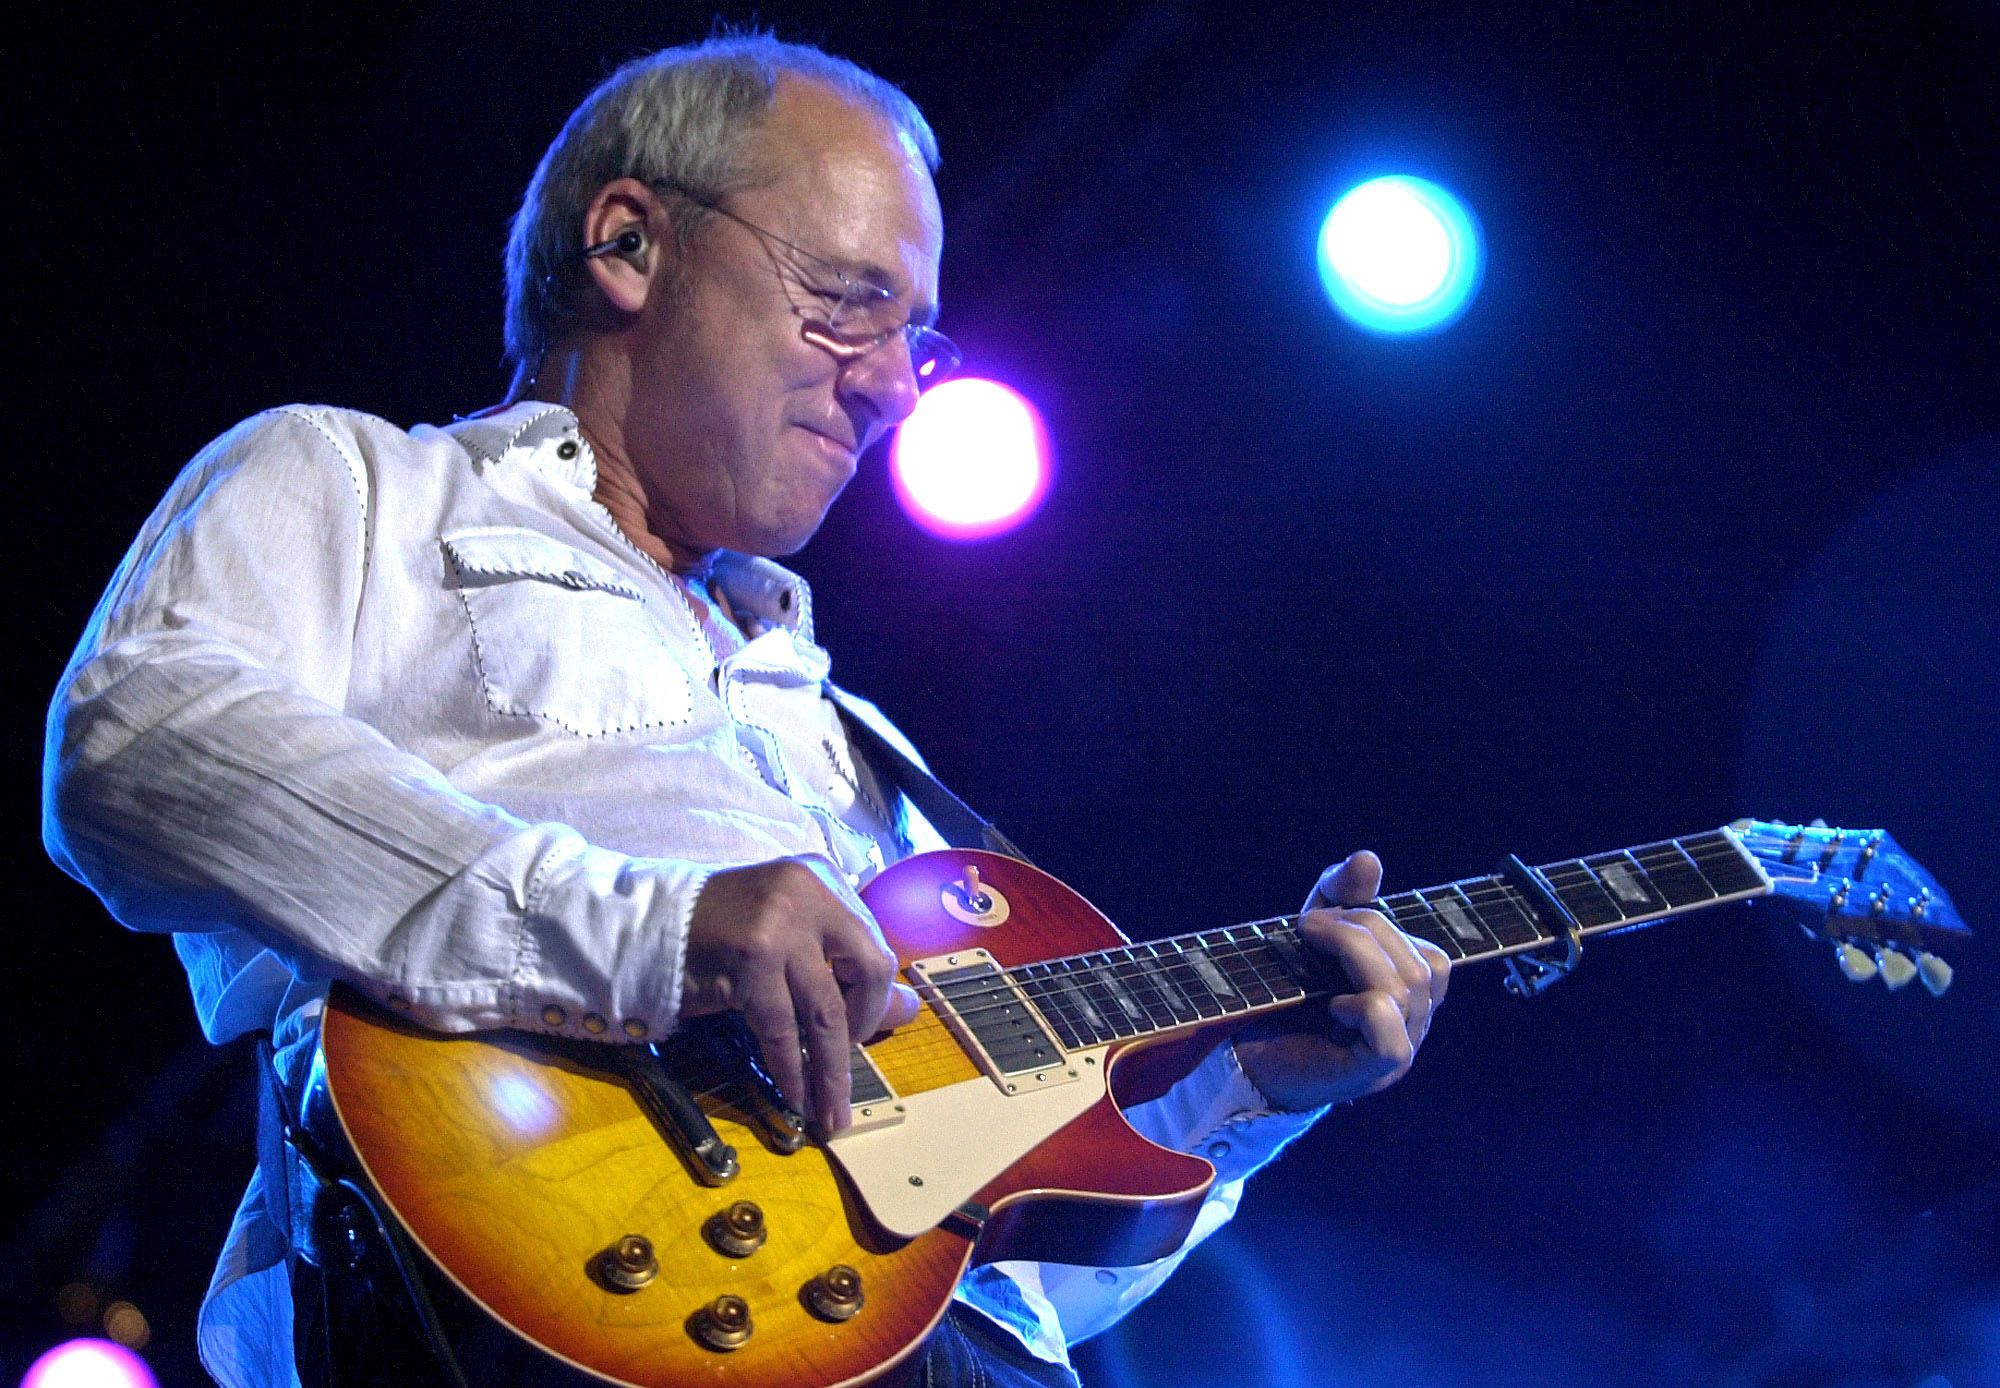 Mark Knopfler from Dire Straits posed in Amsterdam, Netherlands in